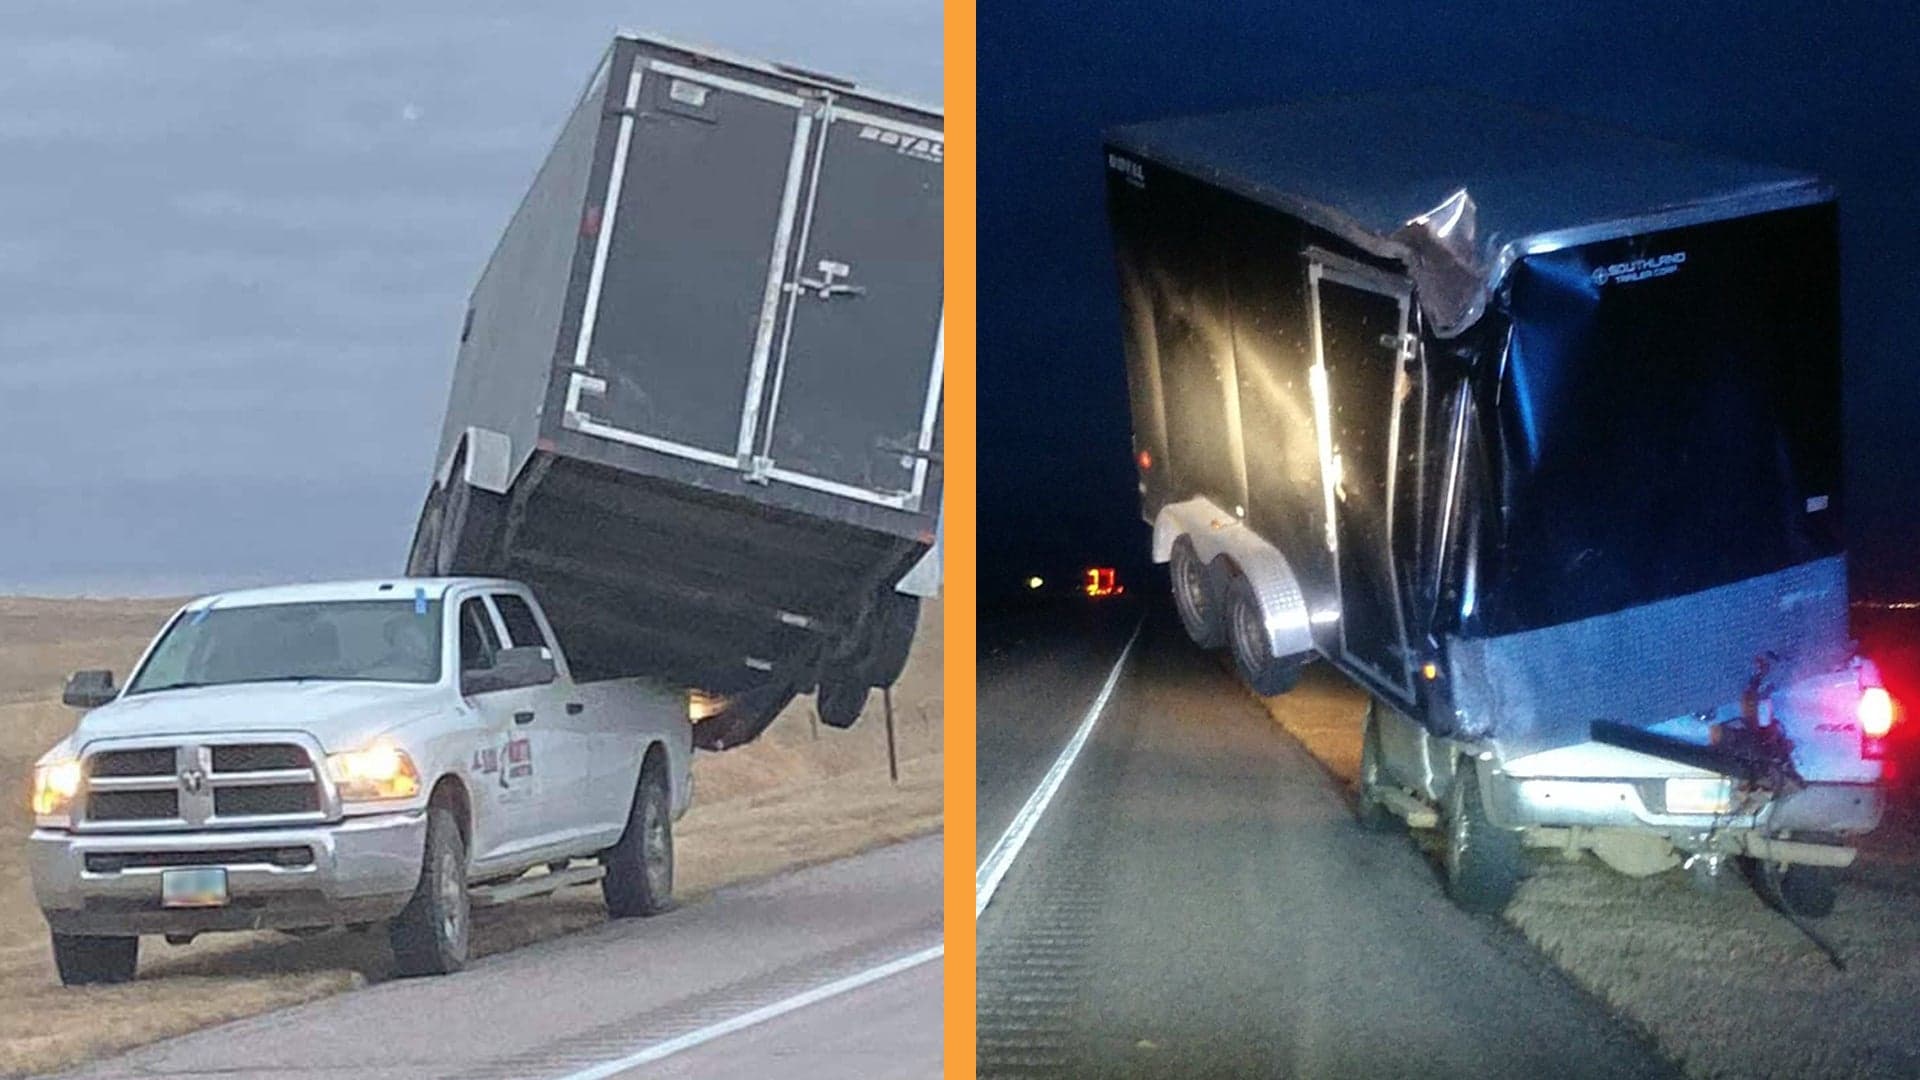 High Winds Blow Trailer Into Bed of Ram Pickup Truck Towing It